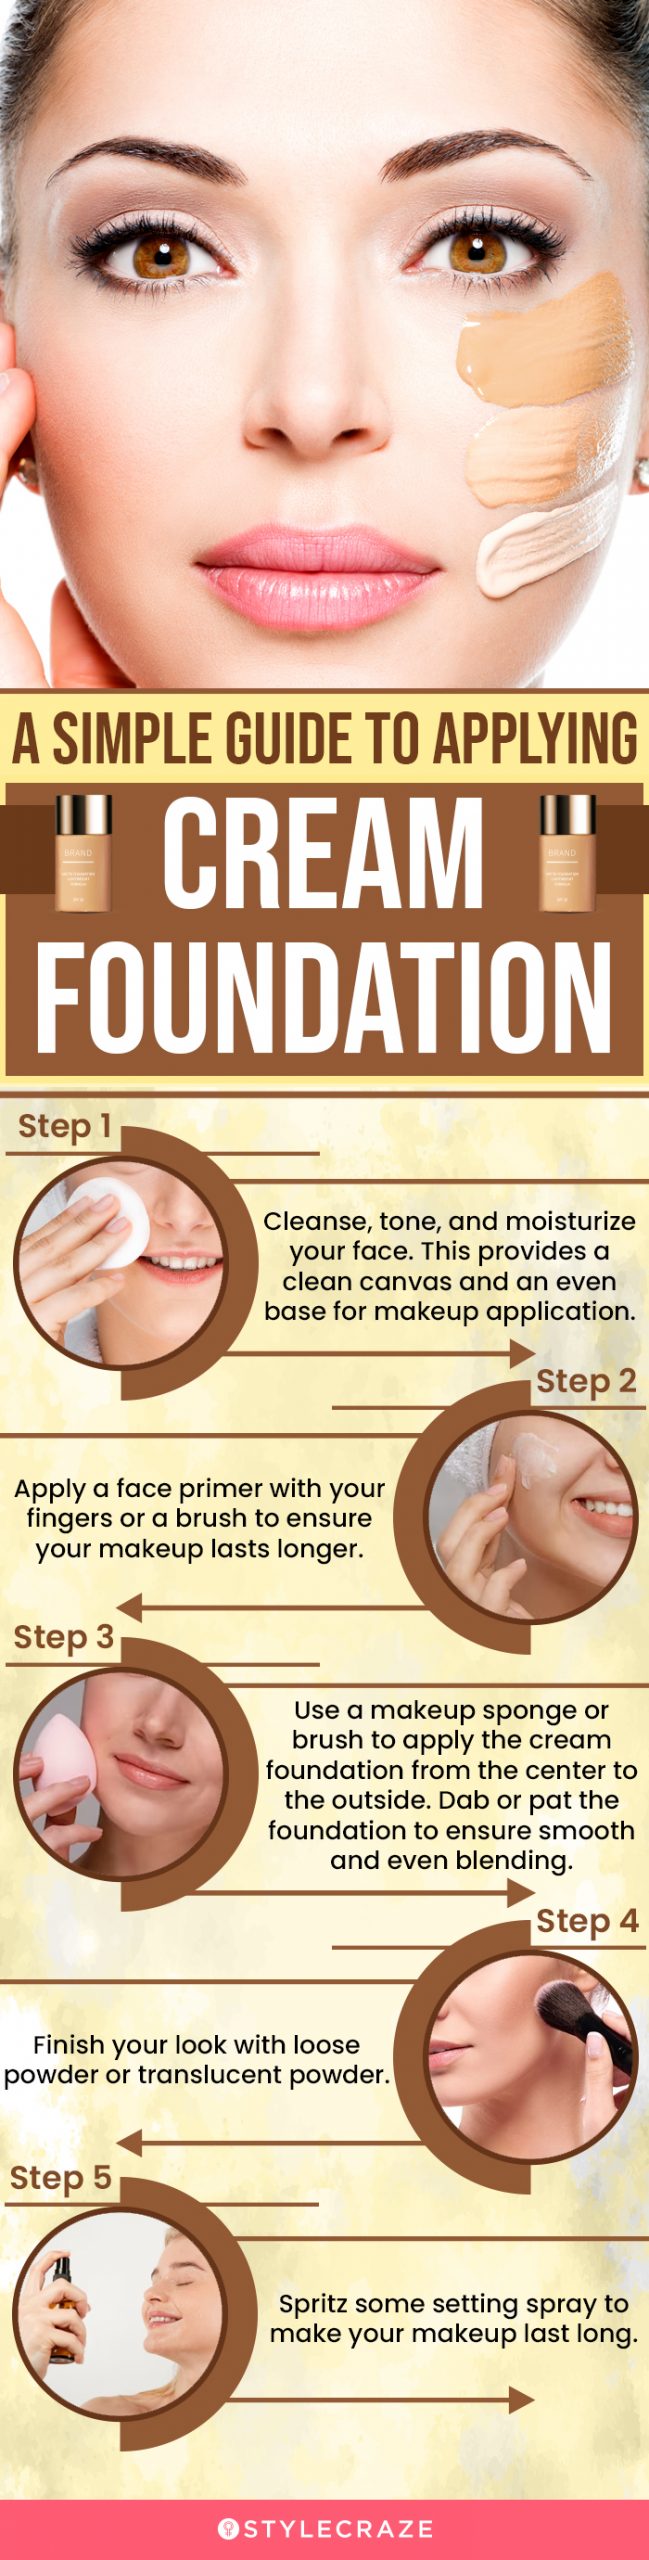 a simple guide to applying cream foundation (infographic)